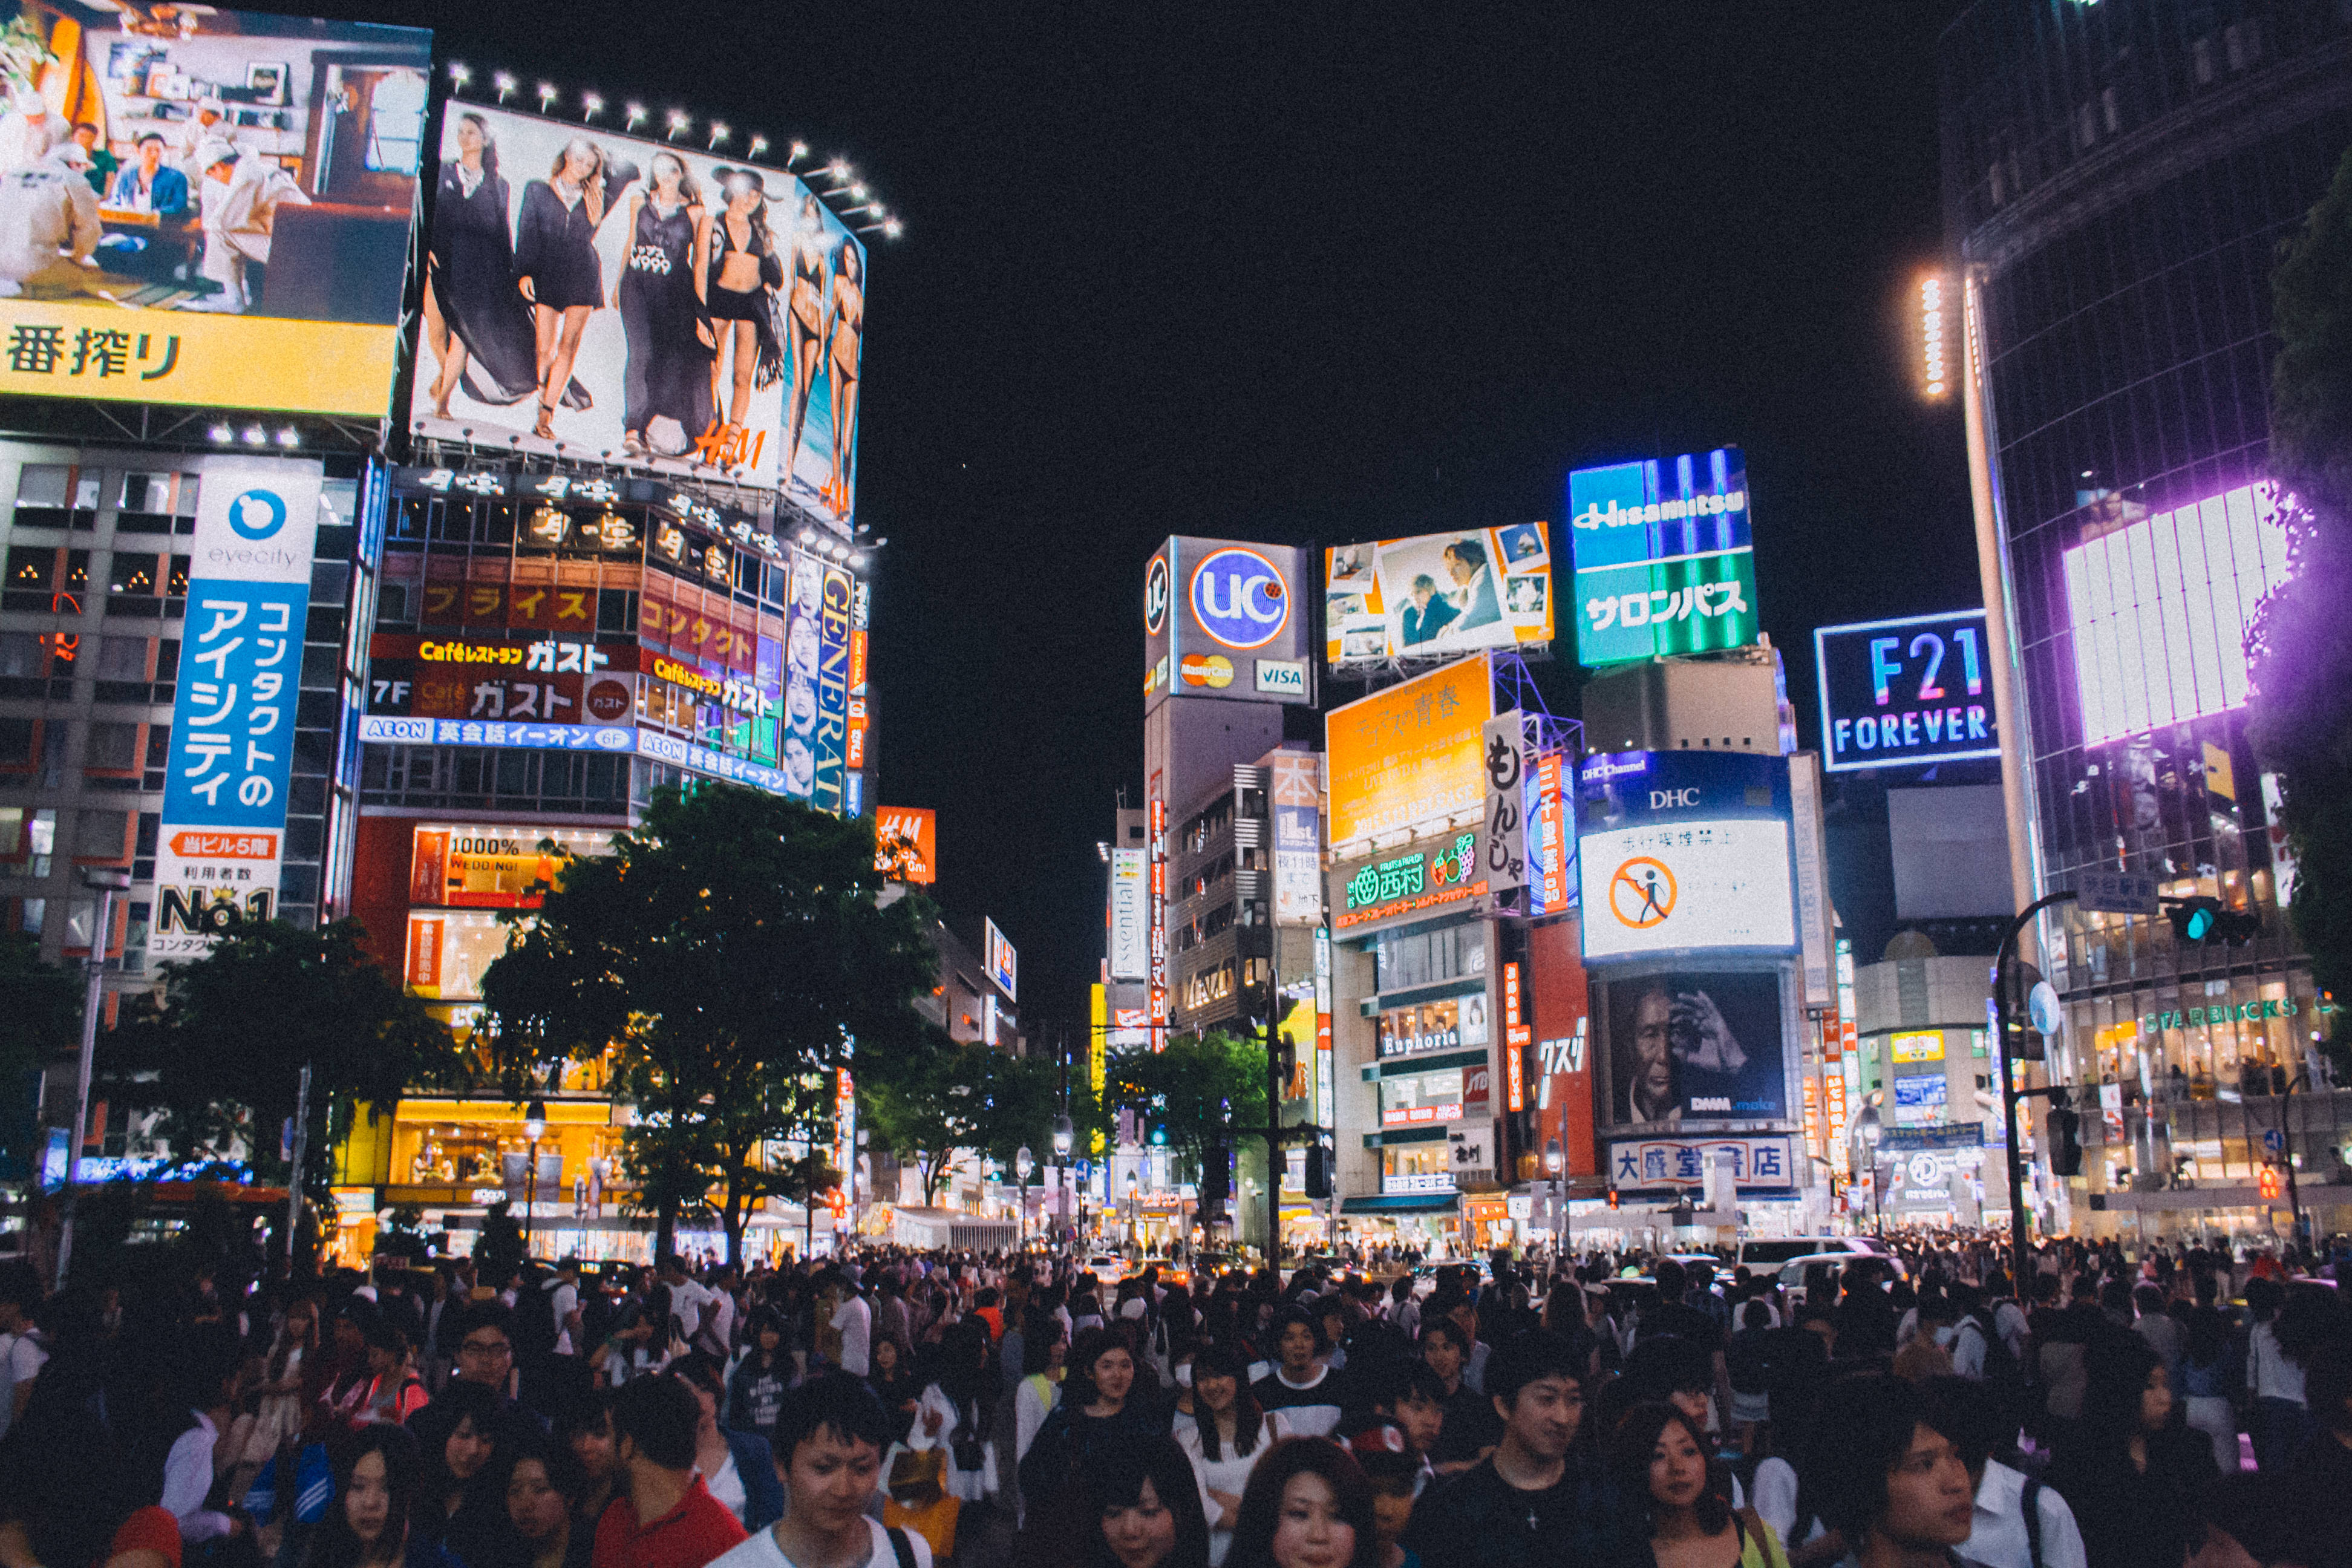 Tips on Doing Business in Japan